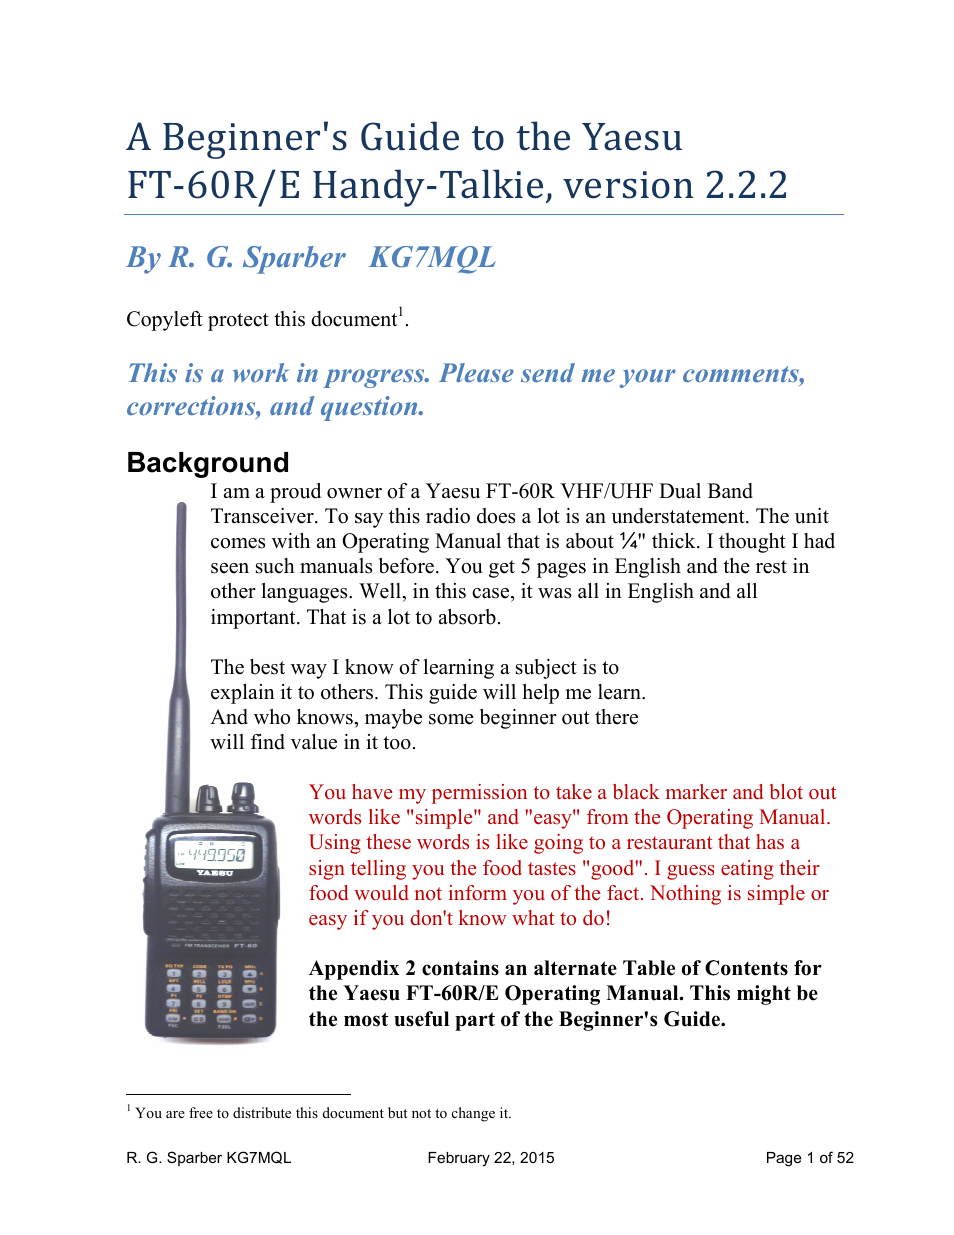 Yaesu FT-60R User Manual | 52 pages